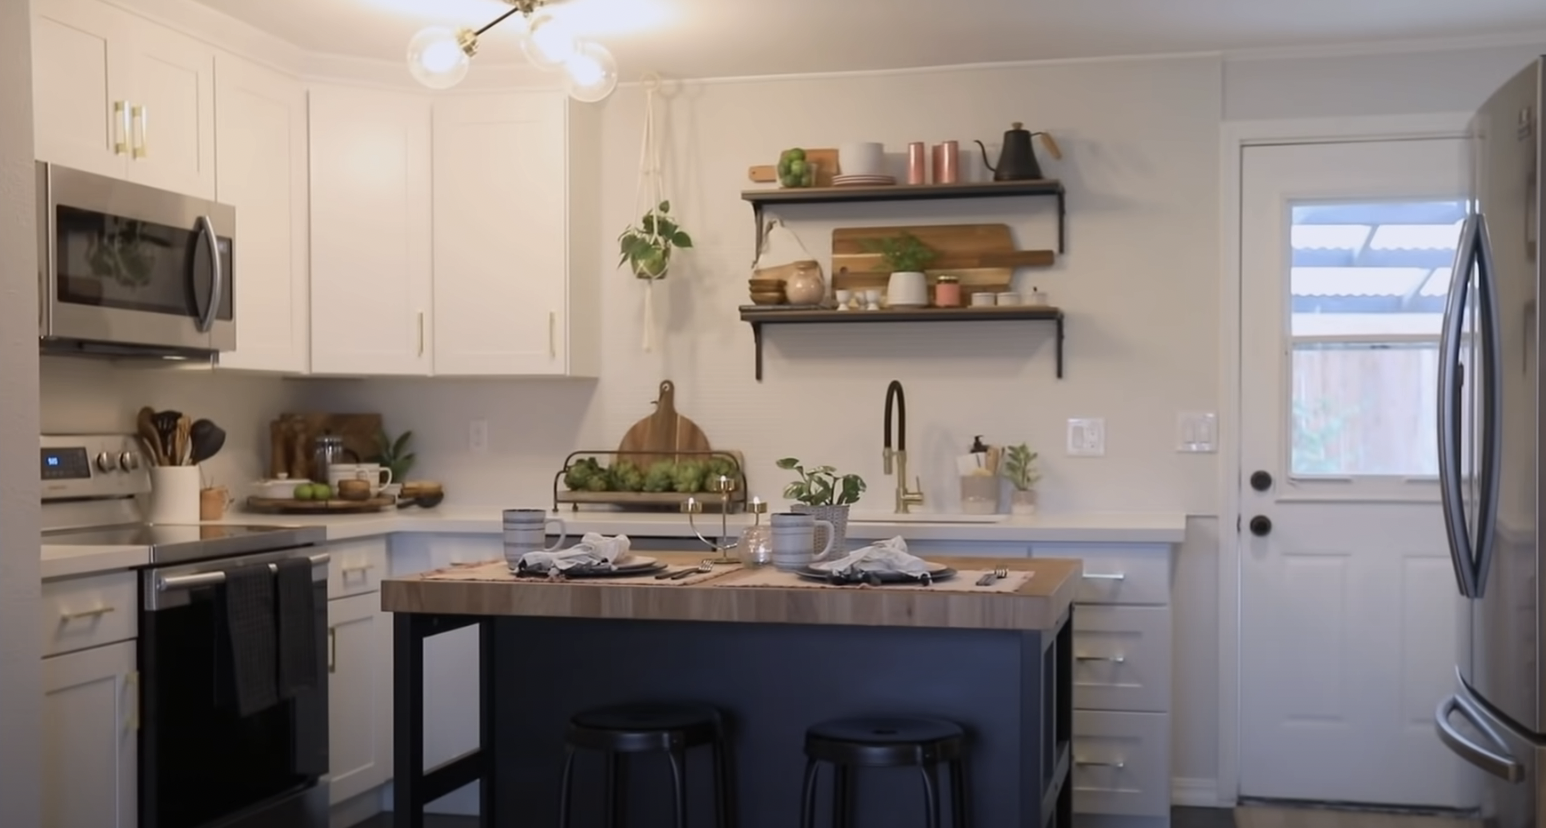 A kitchen designed by Lyndsay and Leslie, including white cabinets and a navy blue island with butcher block countertops